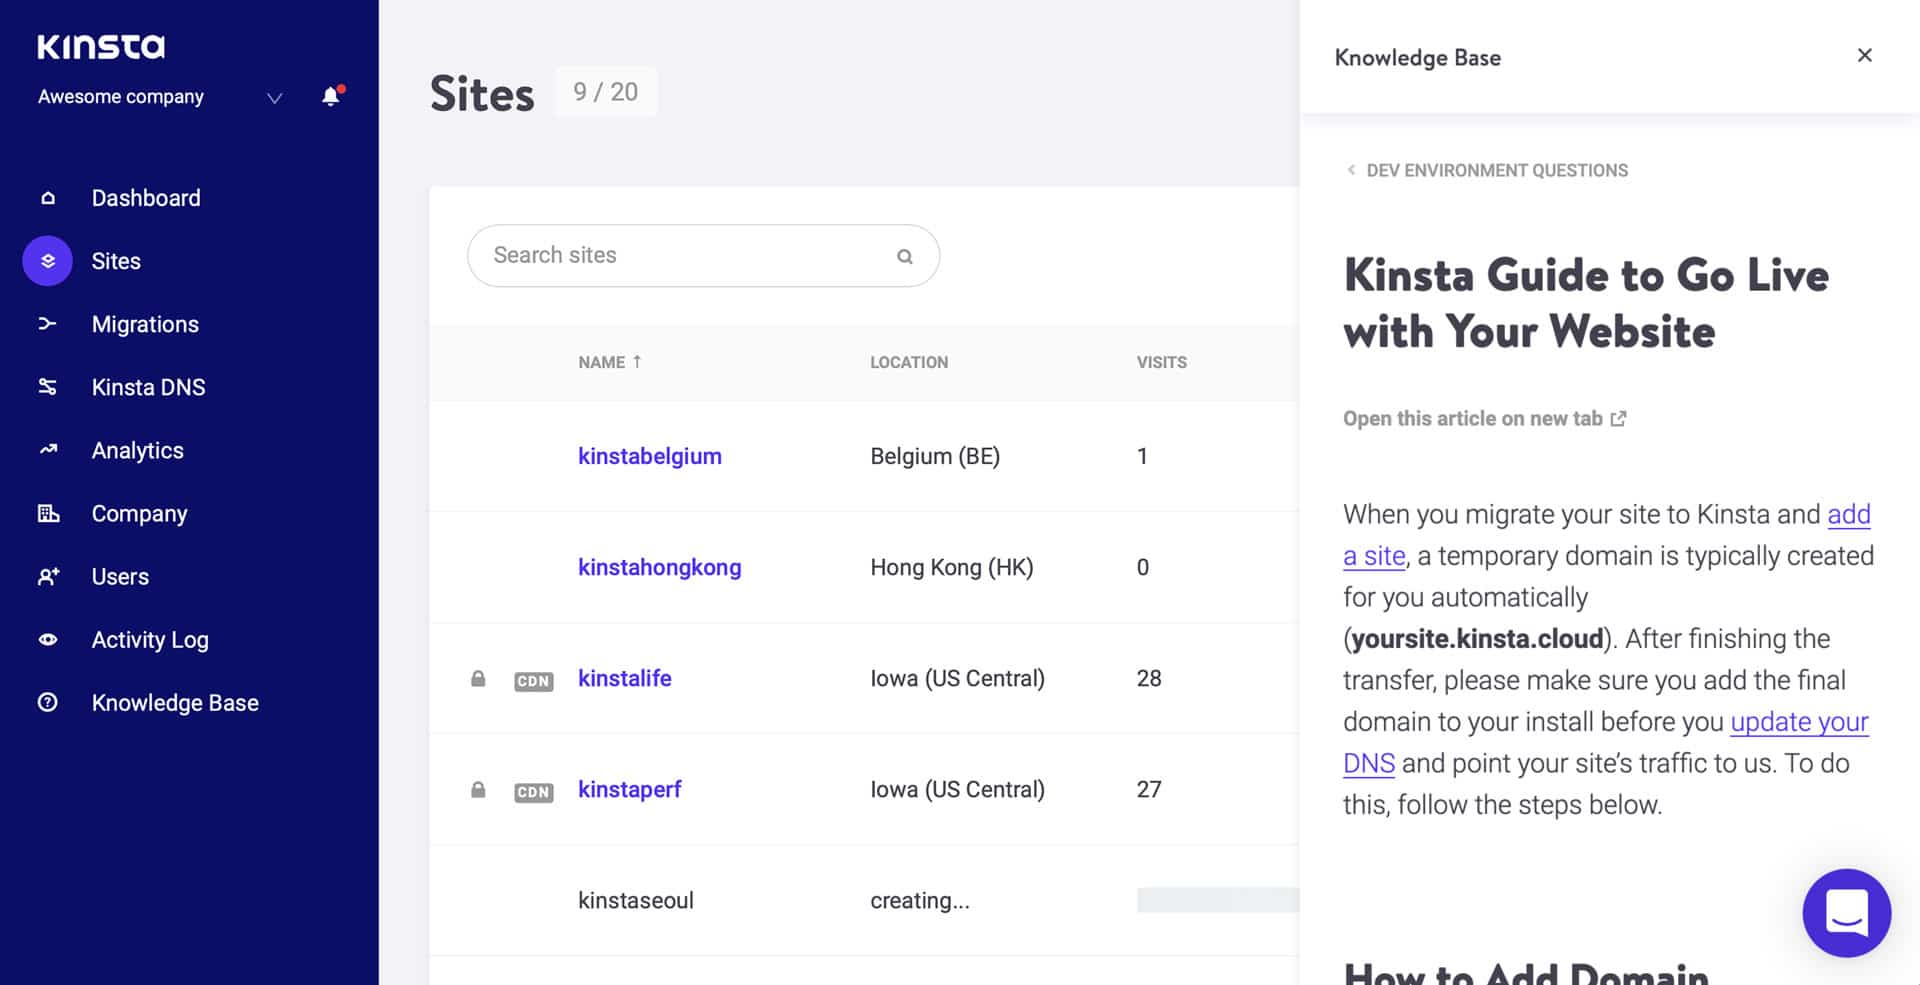 Be sure to read through Kinsta's go-live checklist during site creation.